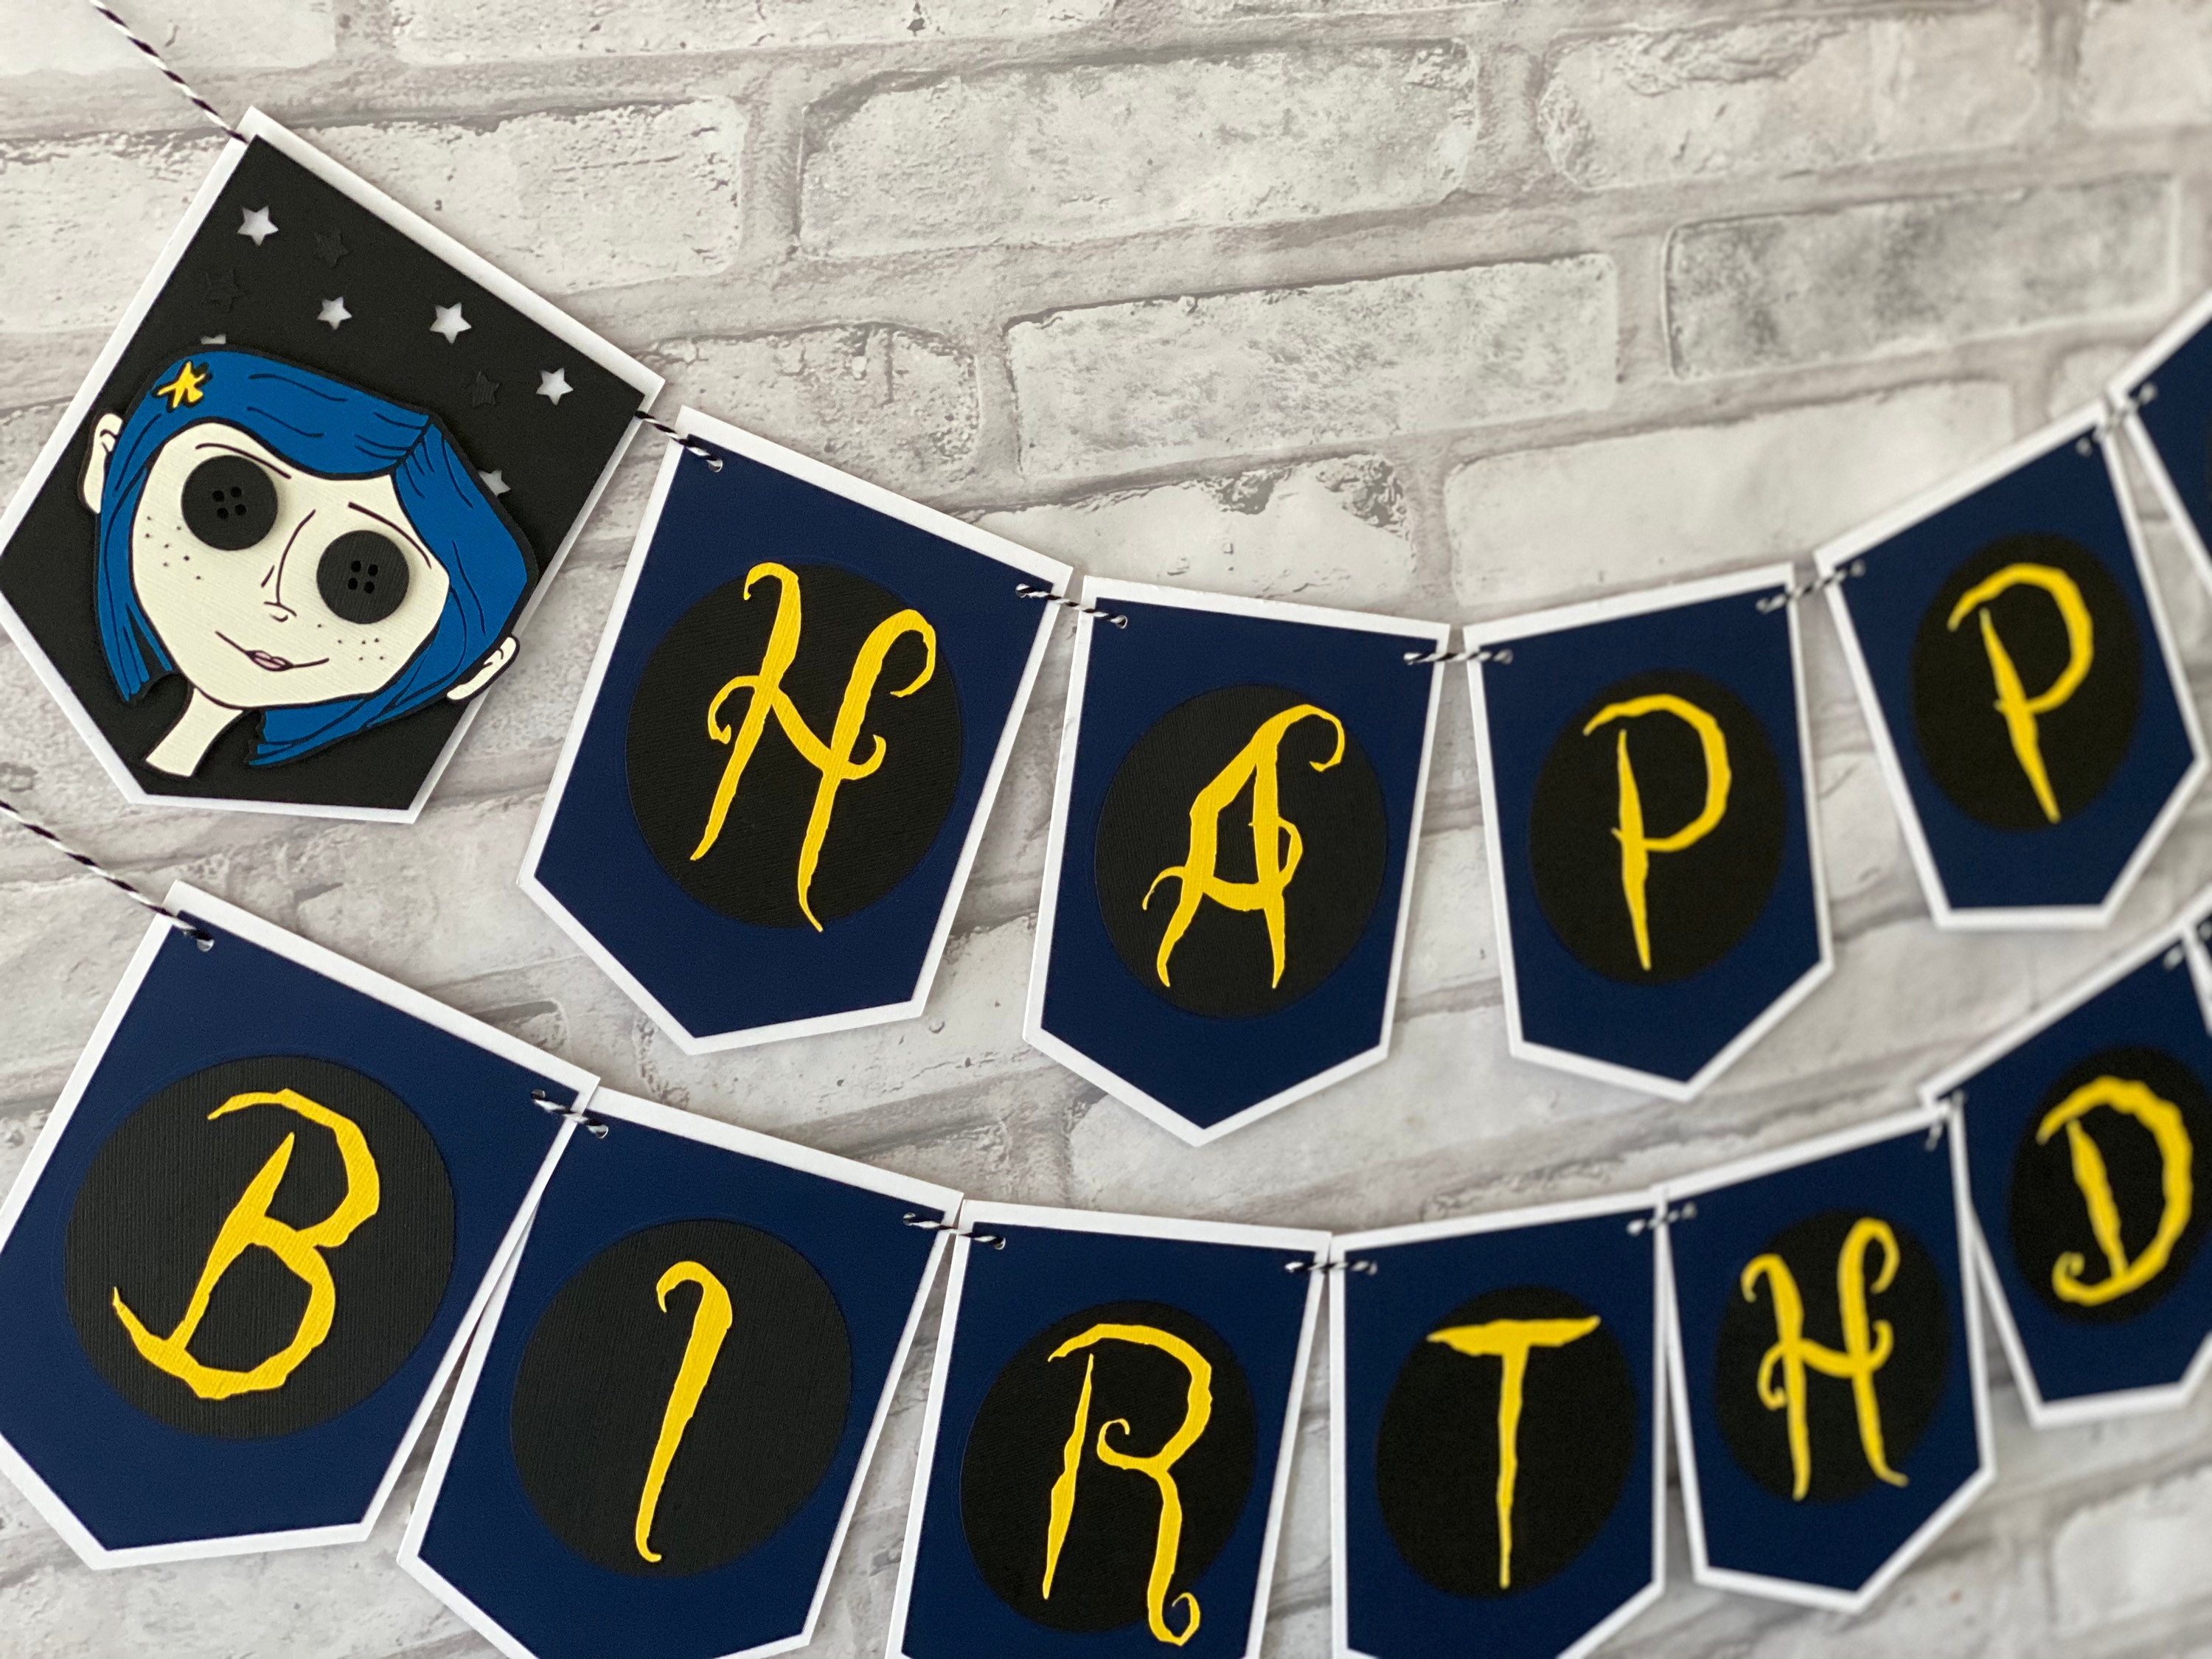 Coraline Theme Horror Series Birthday Party Decoration Set Banner Cake Card  Balloons Halloween Party Event Scene Layout Supplies